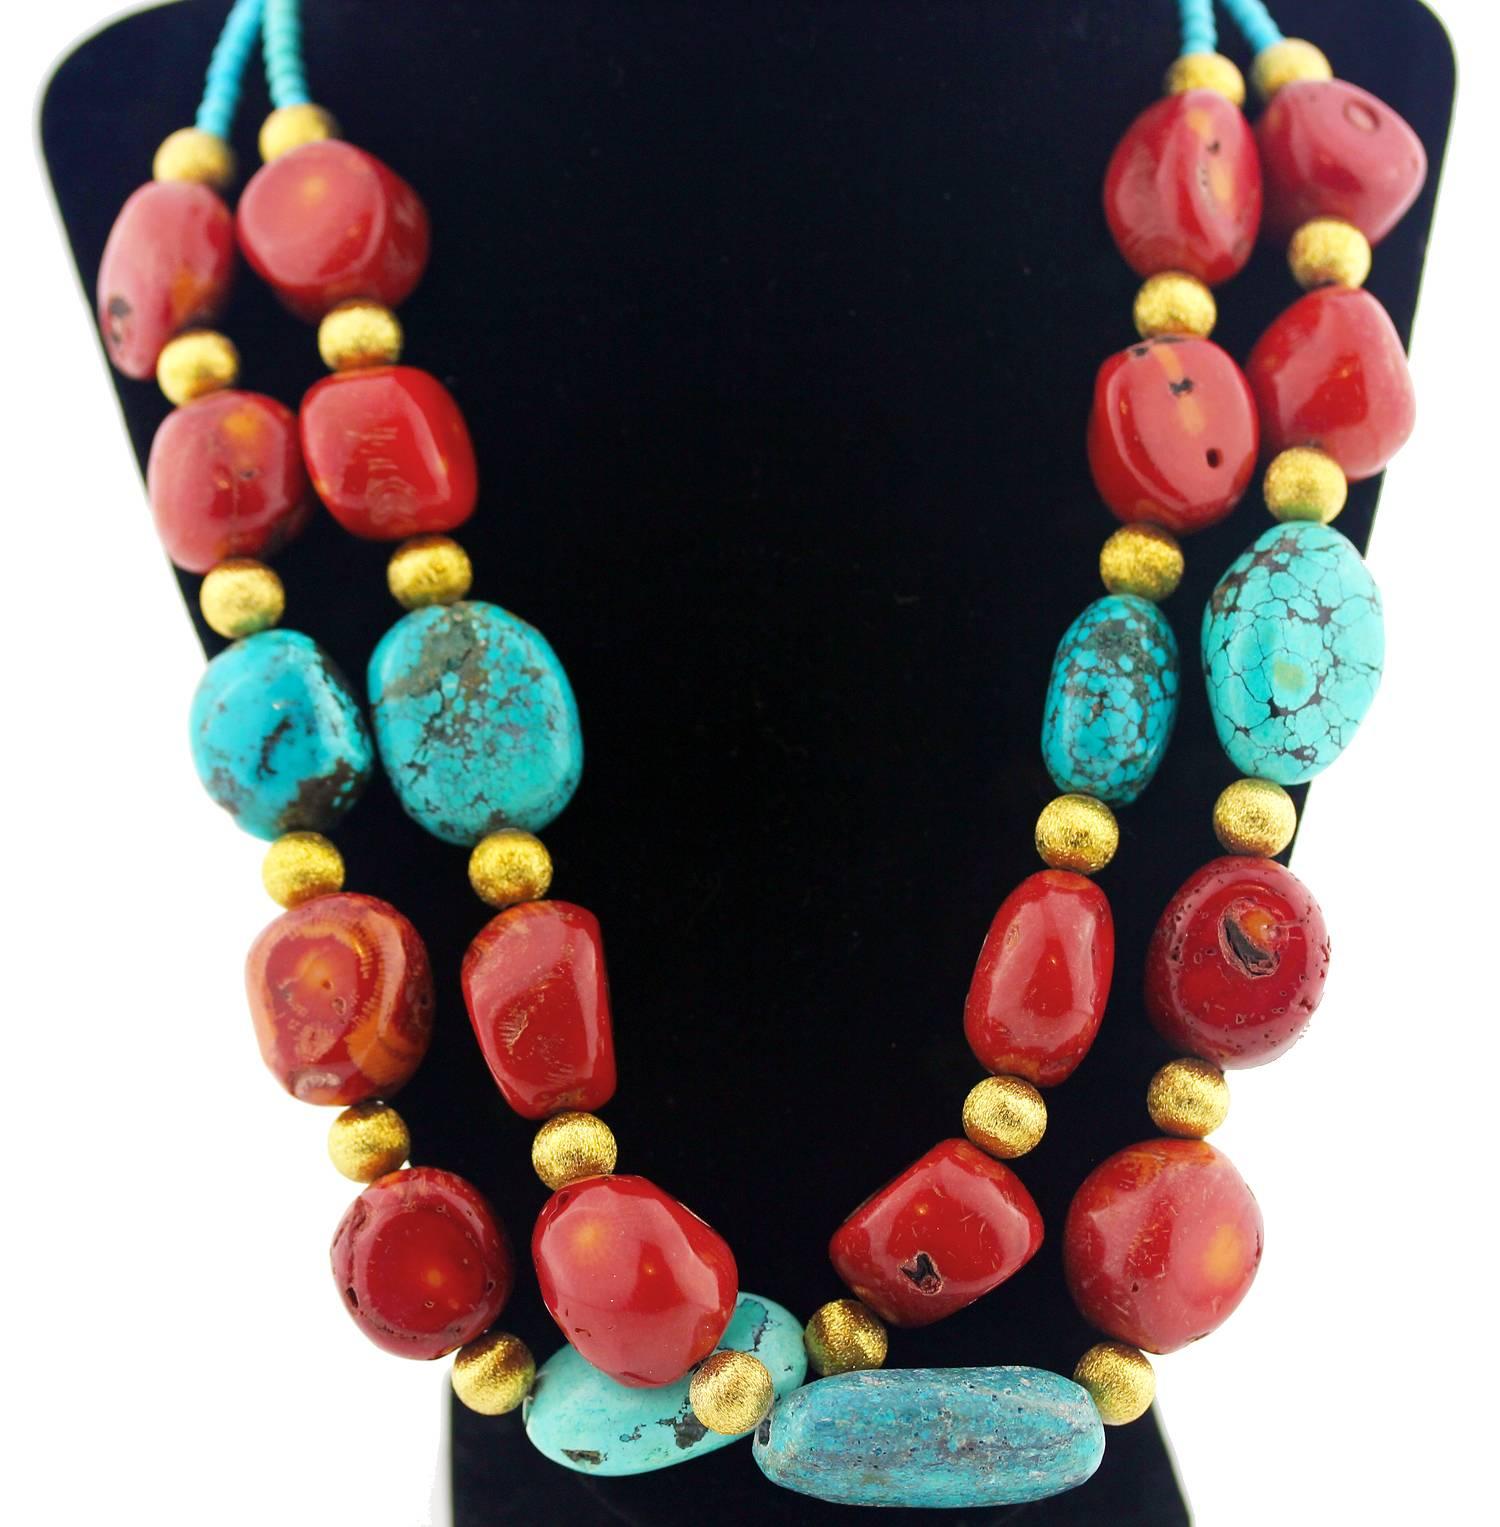 Double strand splendid crude red Coral and uneven rough polished Turquoise with gold tone accents necklace
Size:  Coral approximately .75 inches and Turquoise up to 1.5 inches
Length: 22 inches
Clasp:  silver tone

